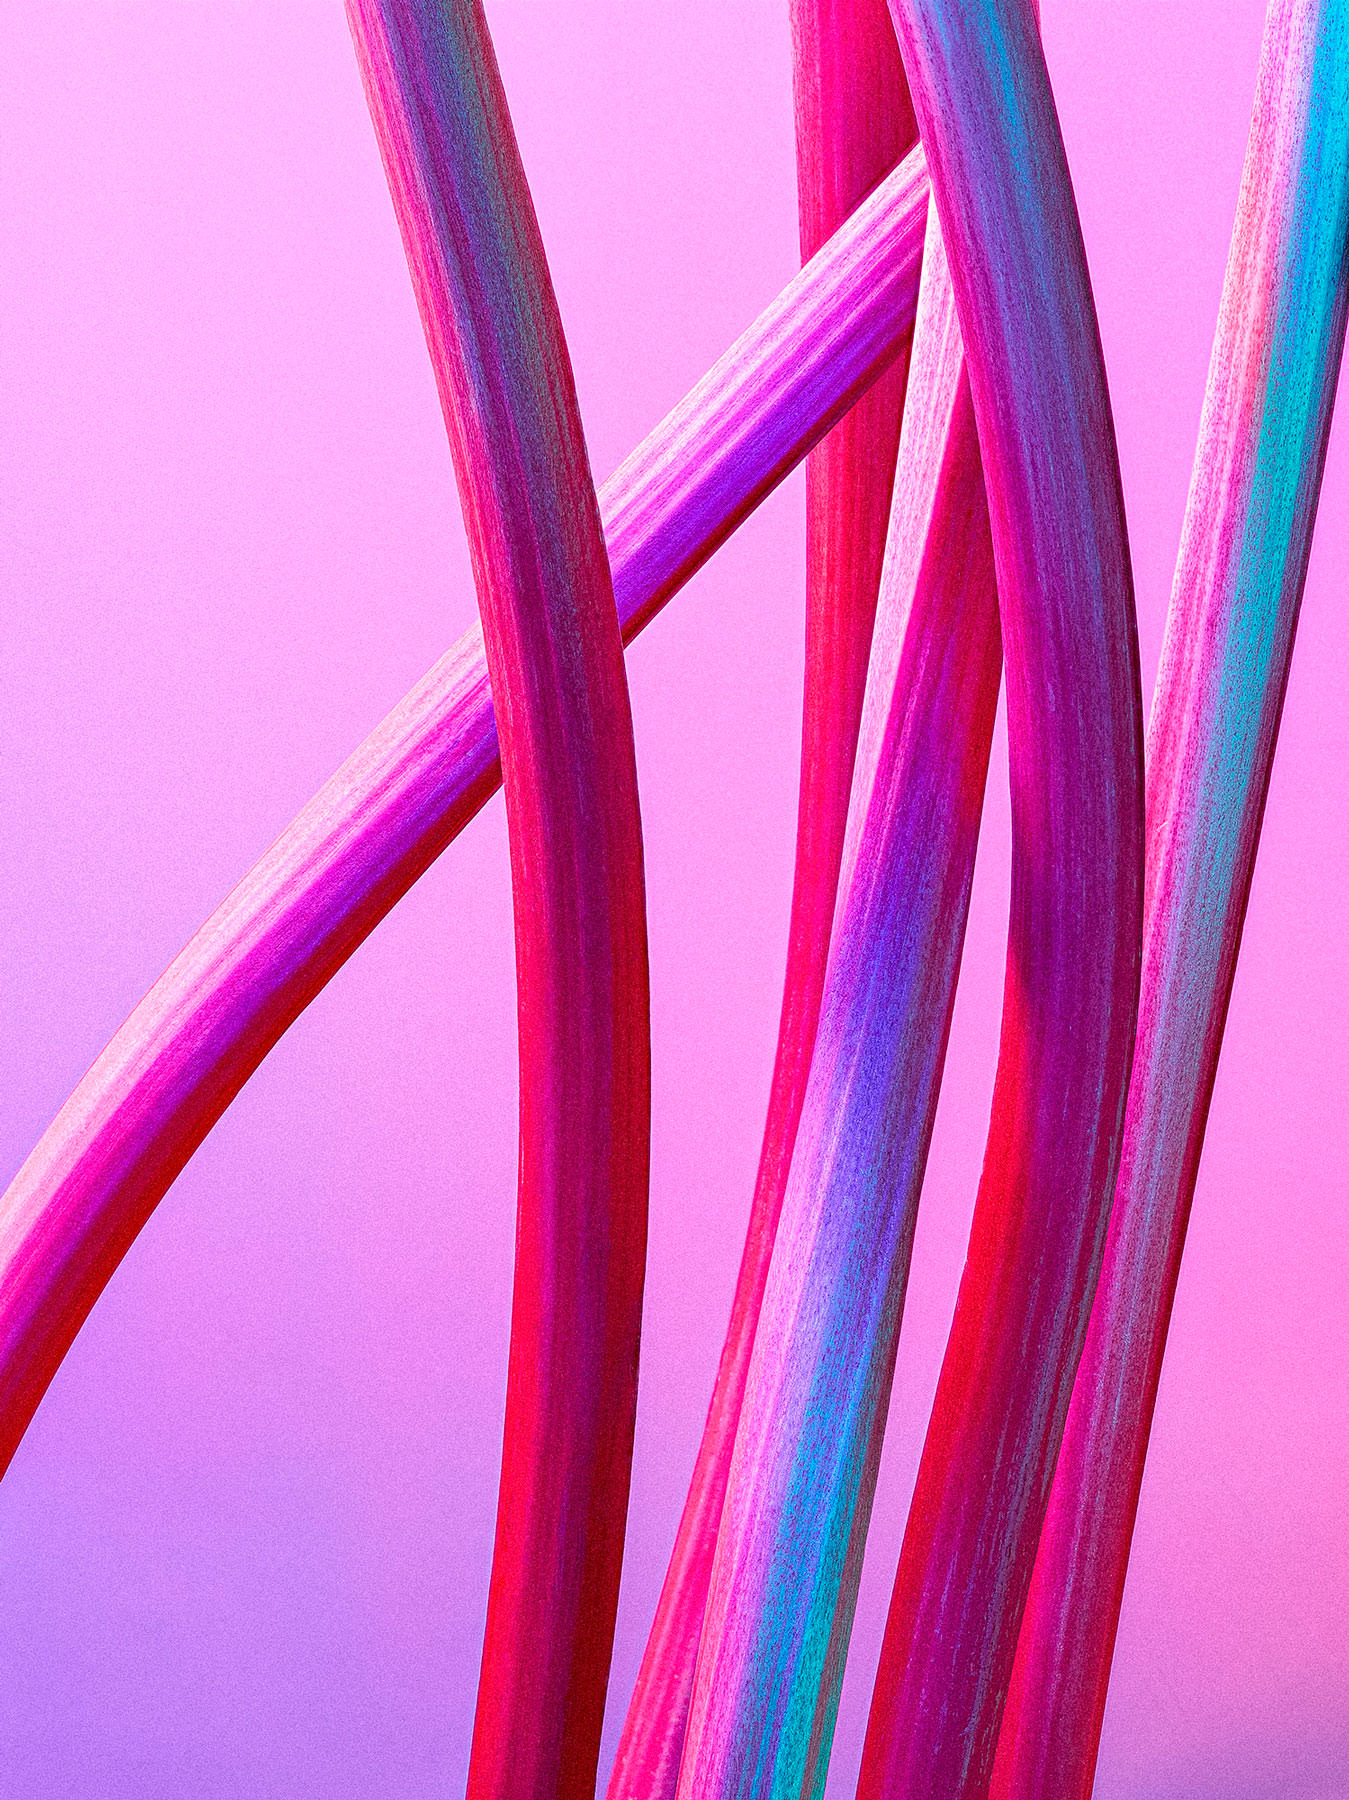 Rhubarb Sticks positioned graphically shot on a pink background - London Food & Drinks Photographer